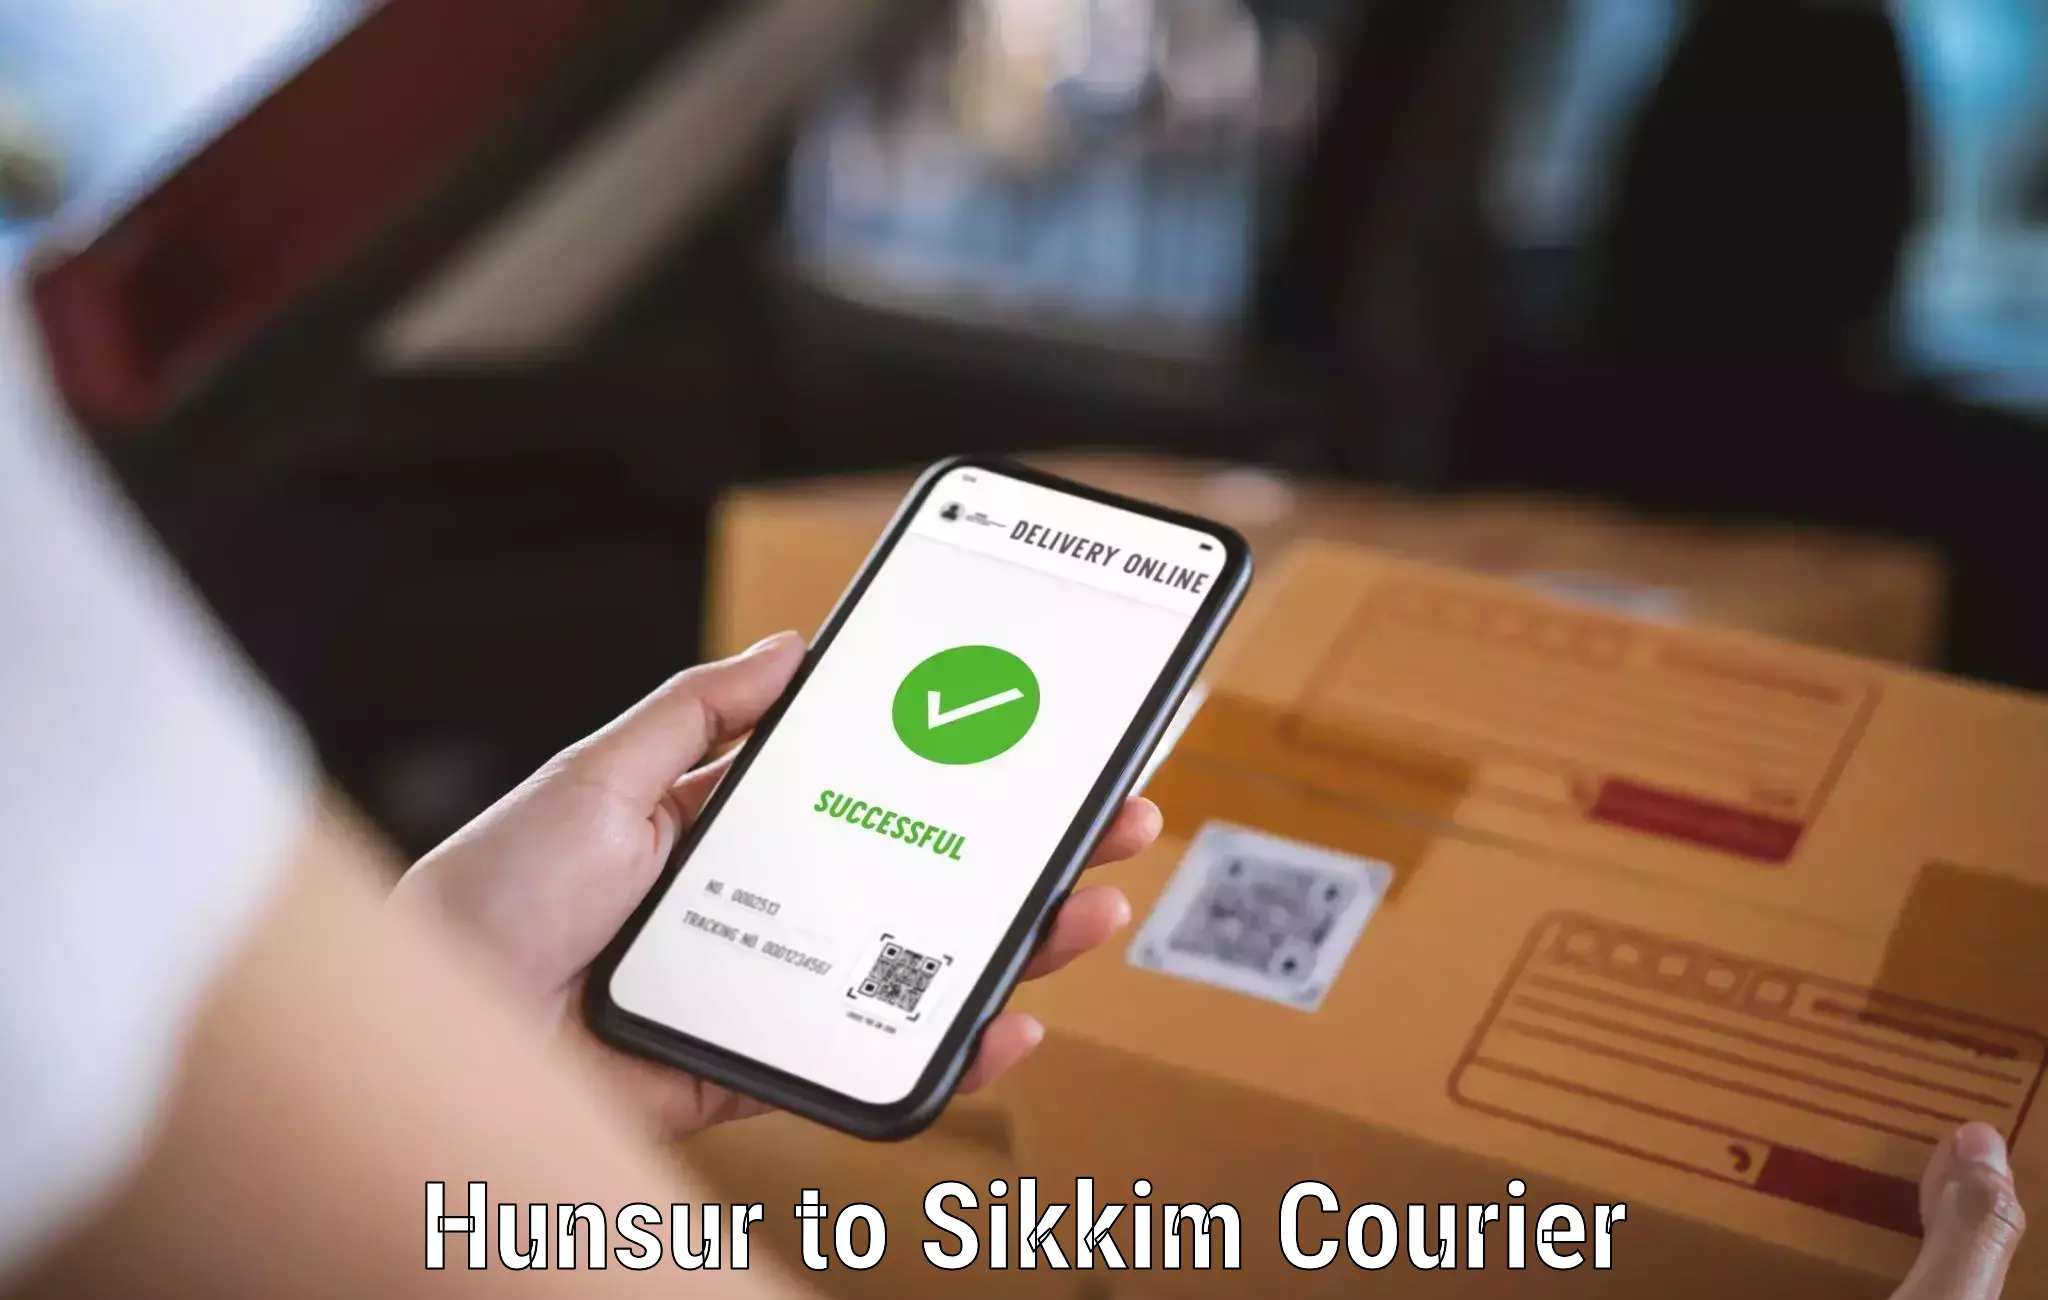 Weekend courier service Hunsur to Pelling